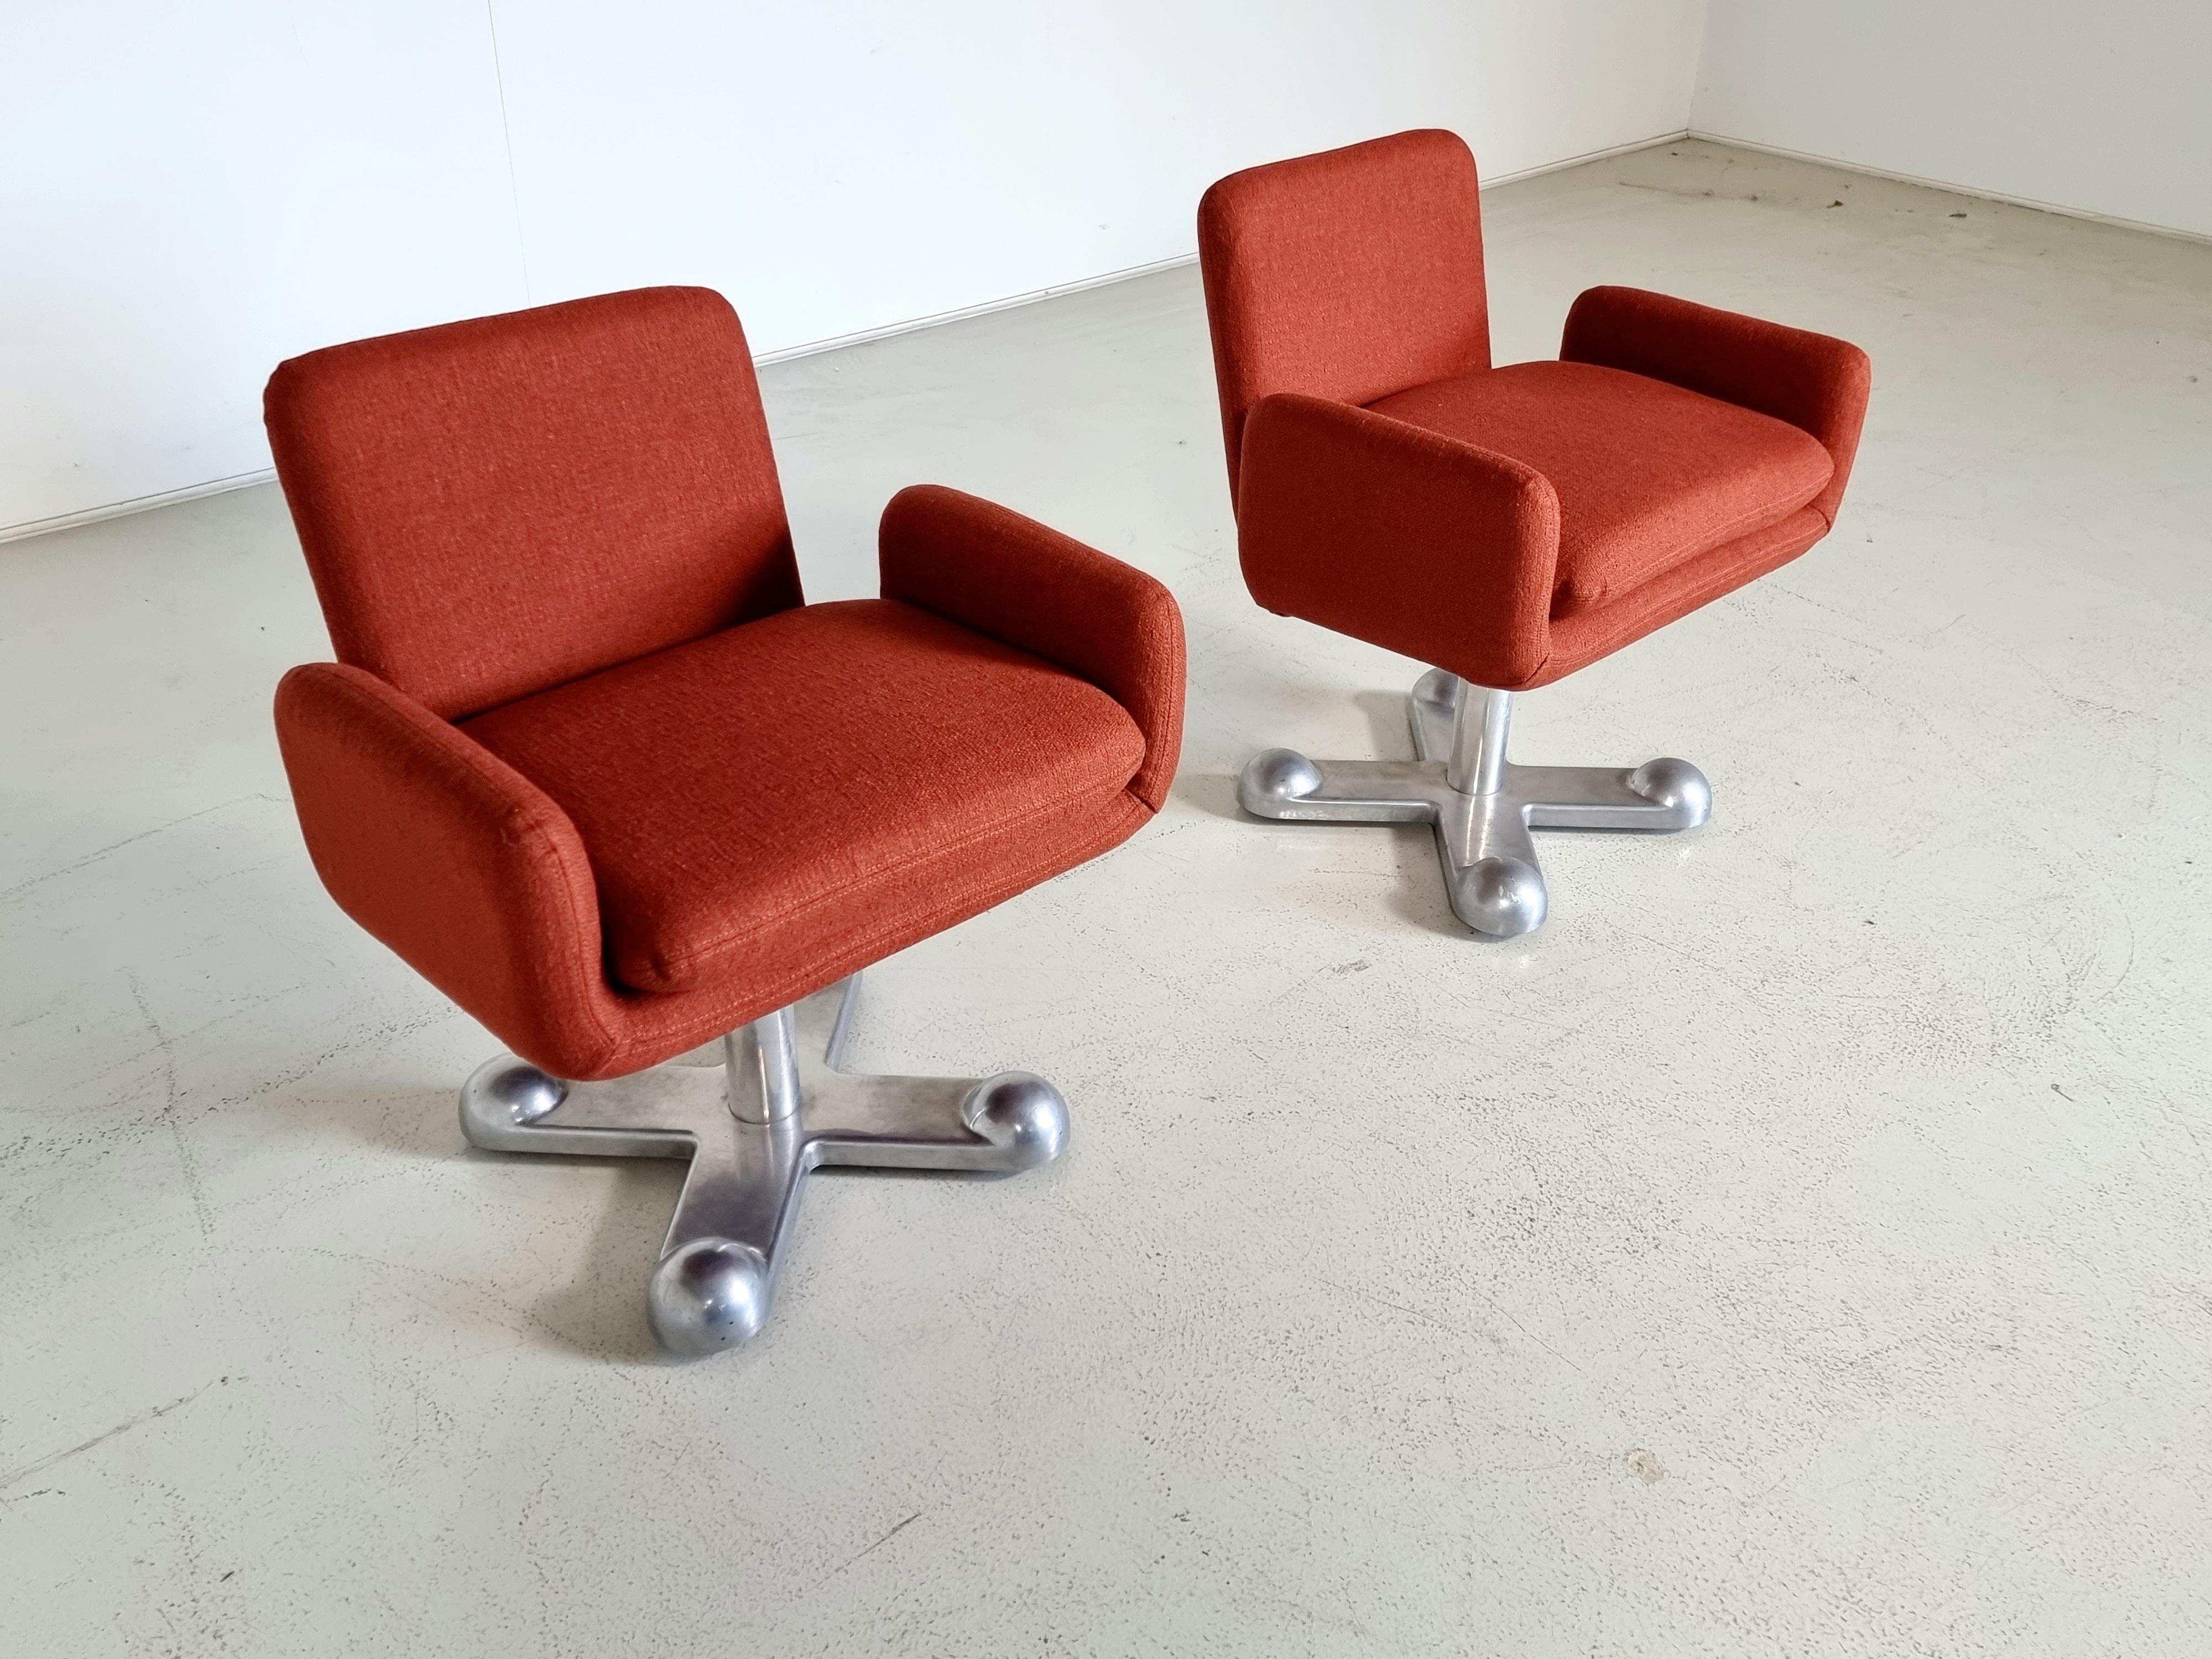 Perry King and Santiago Miranda for Planula, attributed to Ettore Sottsass, Italy, 1970s.

Rare set of swivel desk chairs. The seat shows clean lines with a tilted backrest and armrests that are only connected to the seat instead of the backrest.